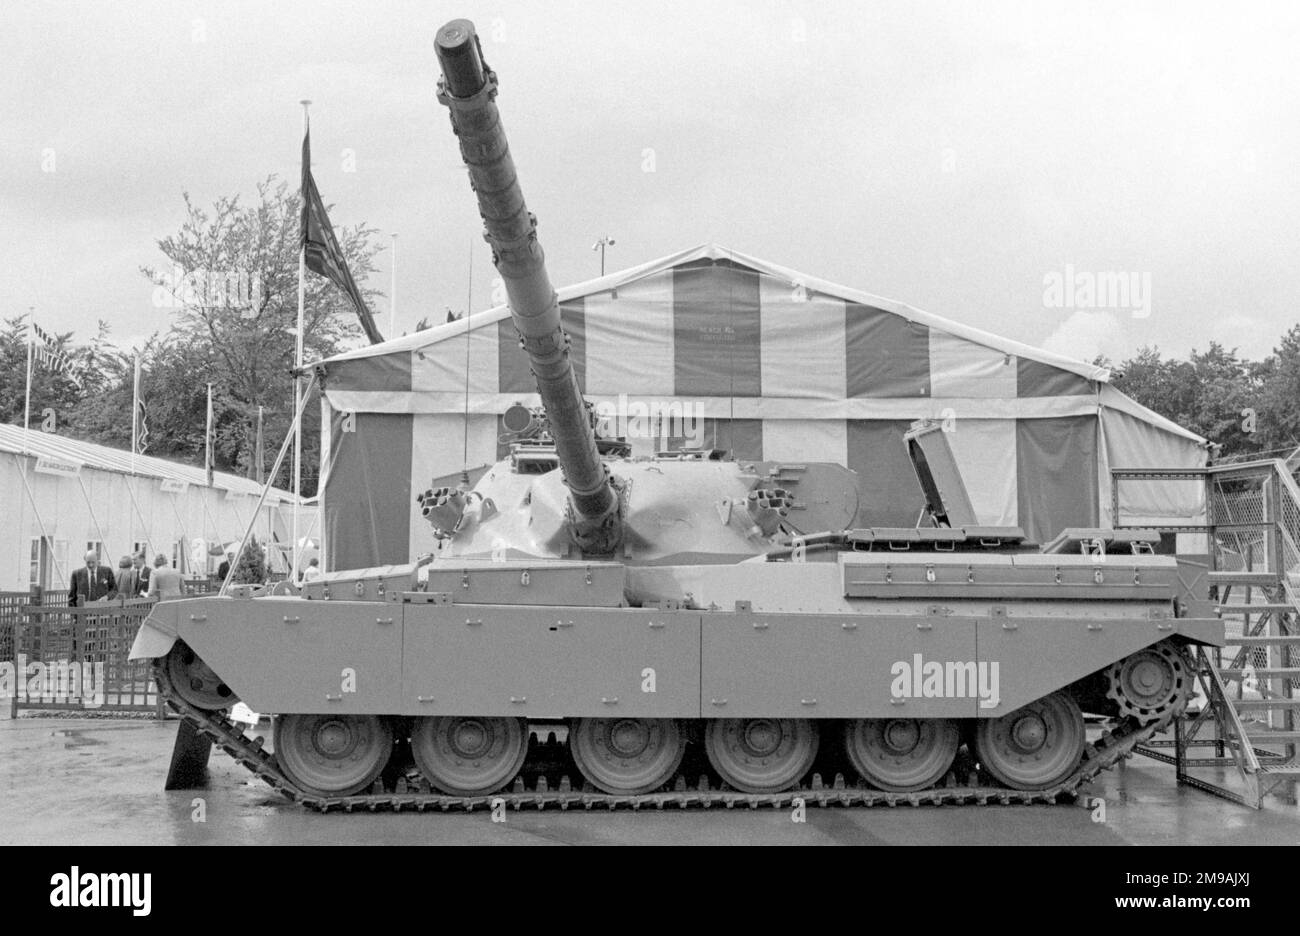 A Chieftain Mk.V tank on display at the British Army Equipment Exhibition, held at Aldershot from 23-27 June 1980. Stock Photo